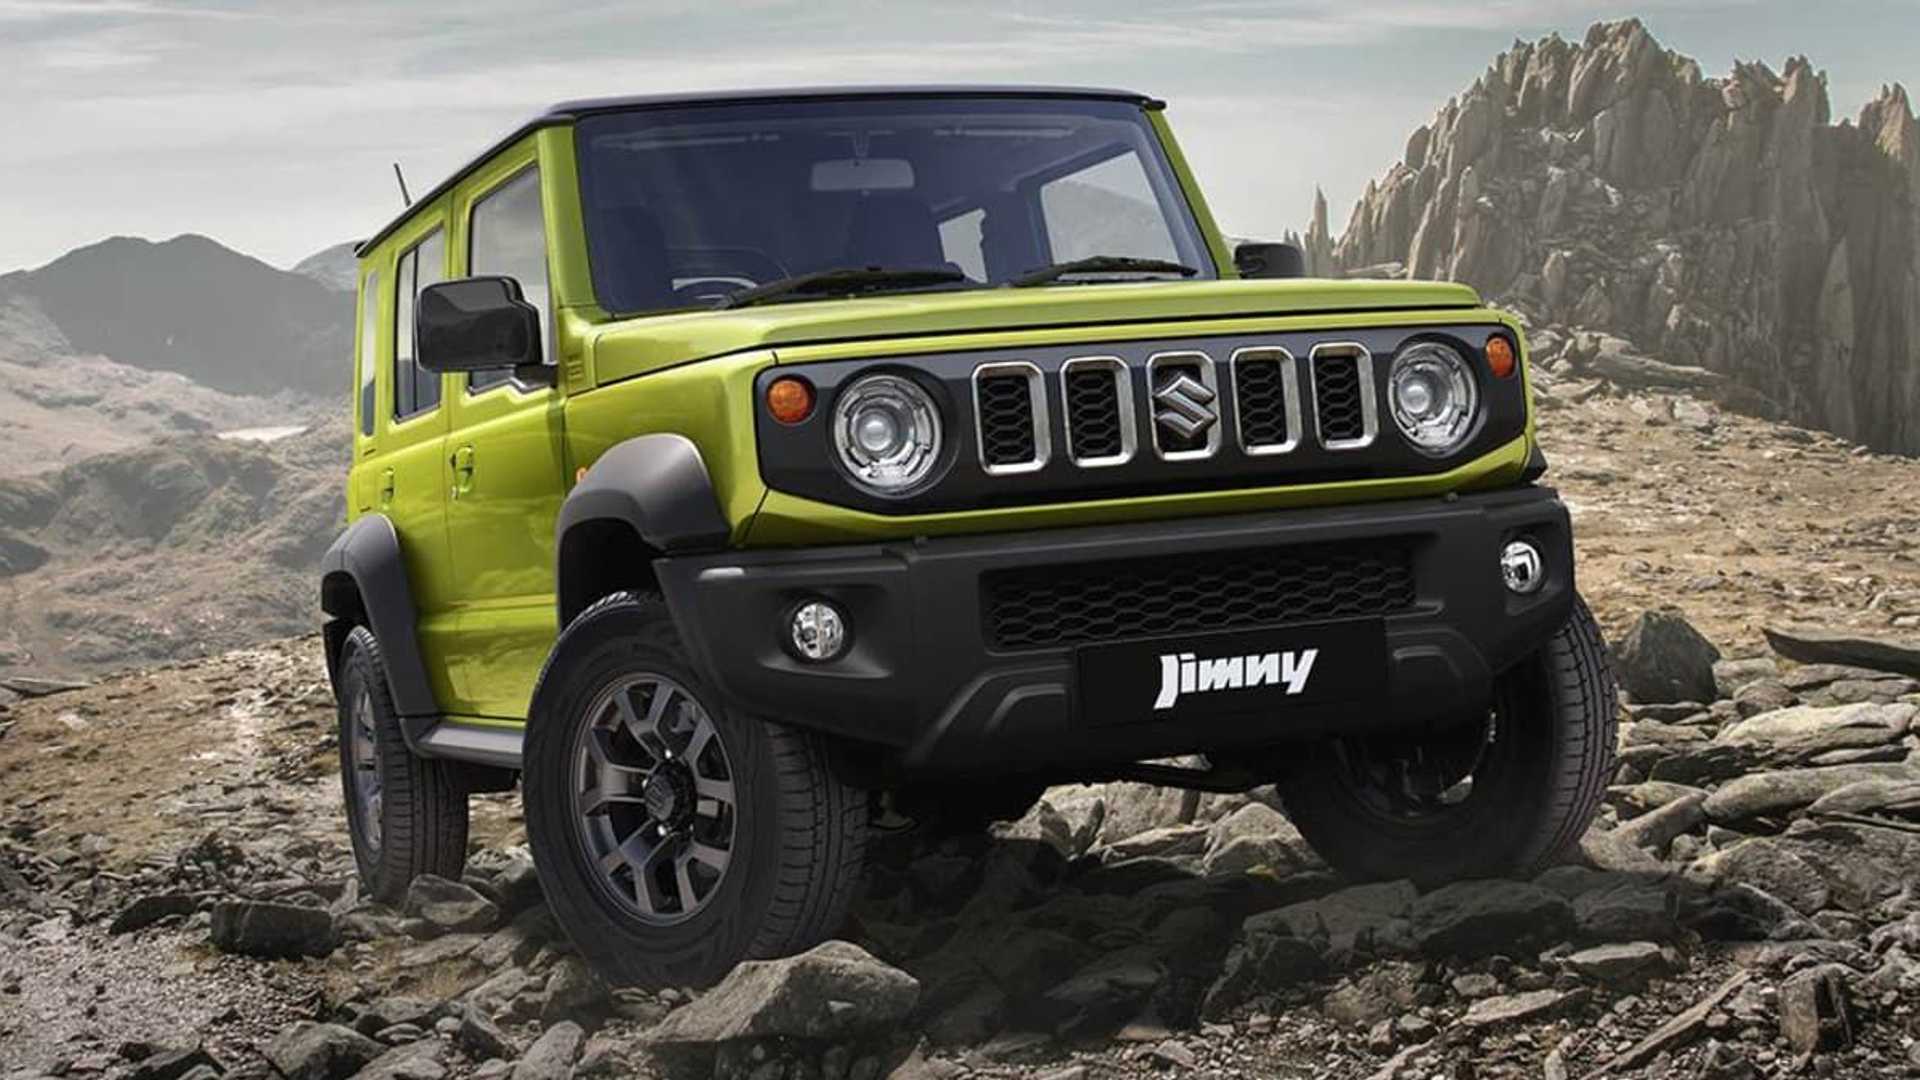 Suzuki finally builds a more-door Jimny, and we want it